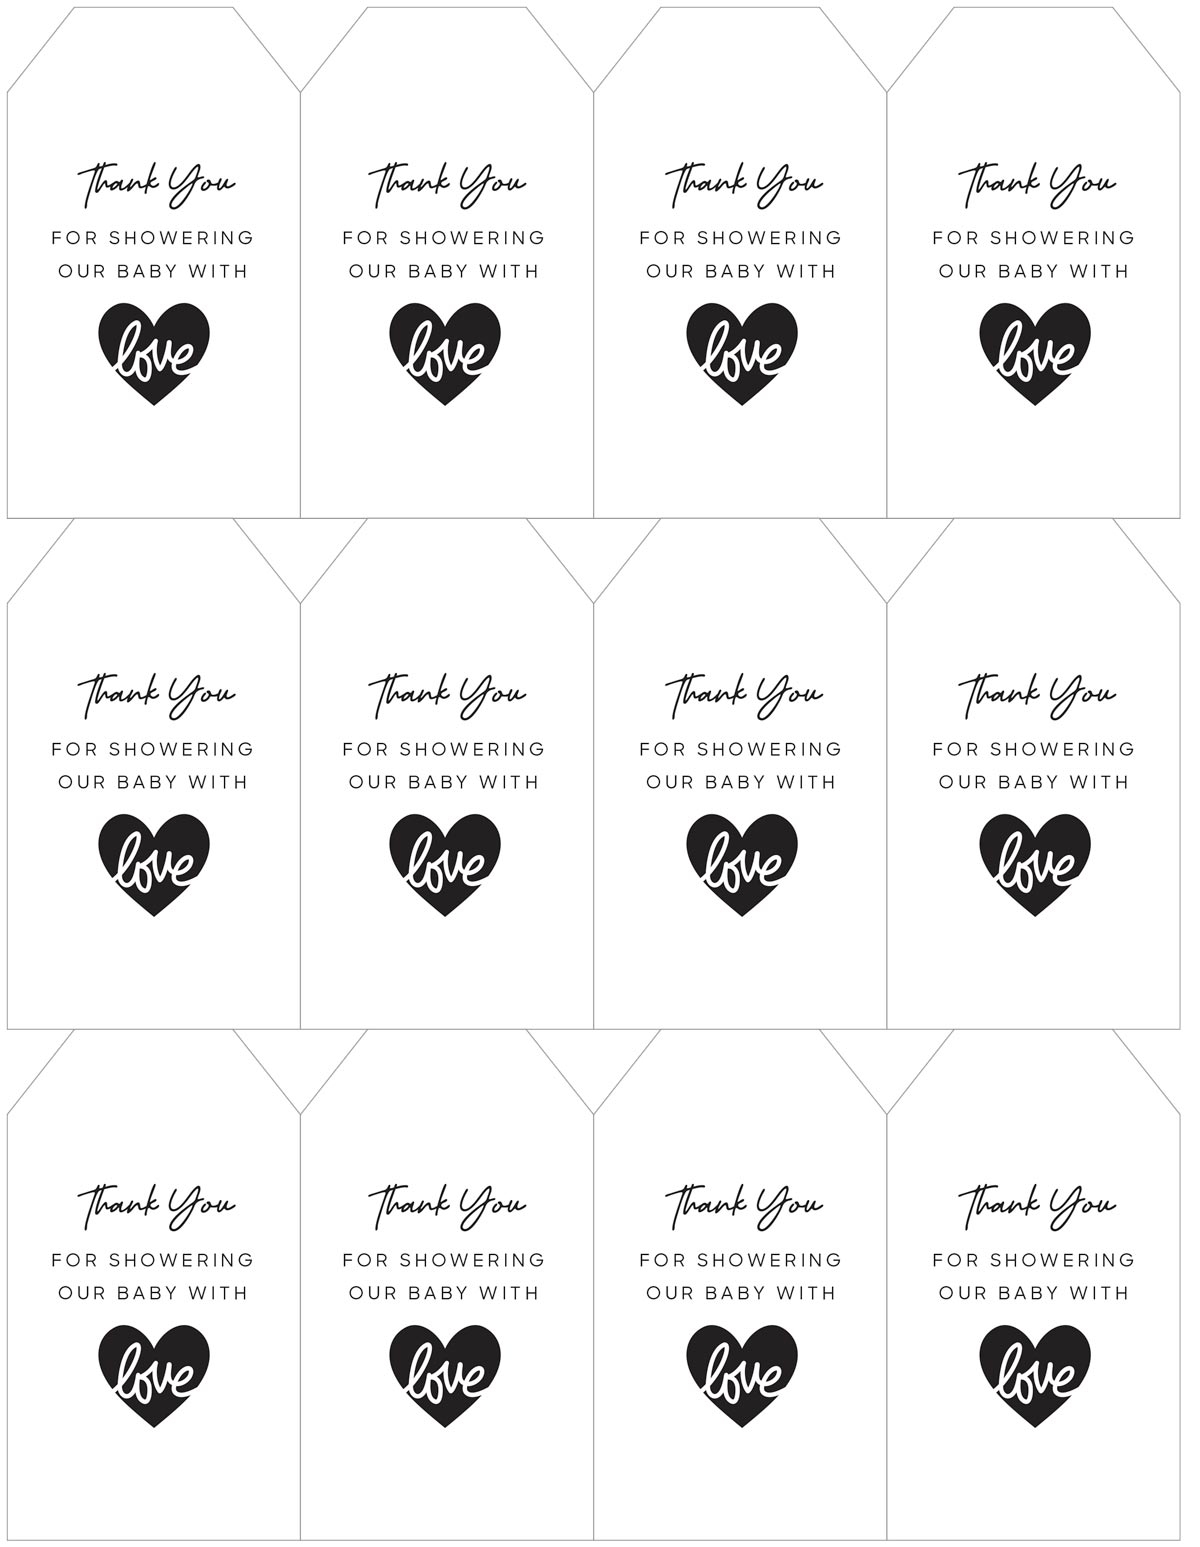 Charming Baby Shower Favor Tags Free Printable For Your Thank You Gifts Skip To My Lou - Free Printable Baby Shower Favor Tags Template